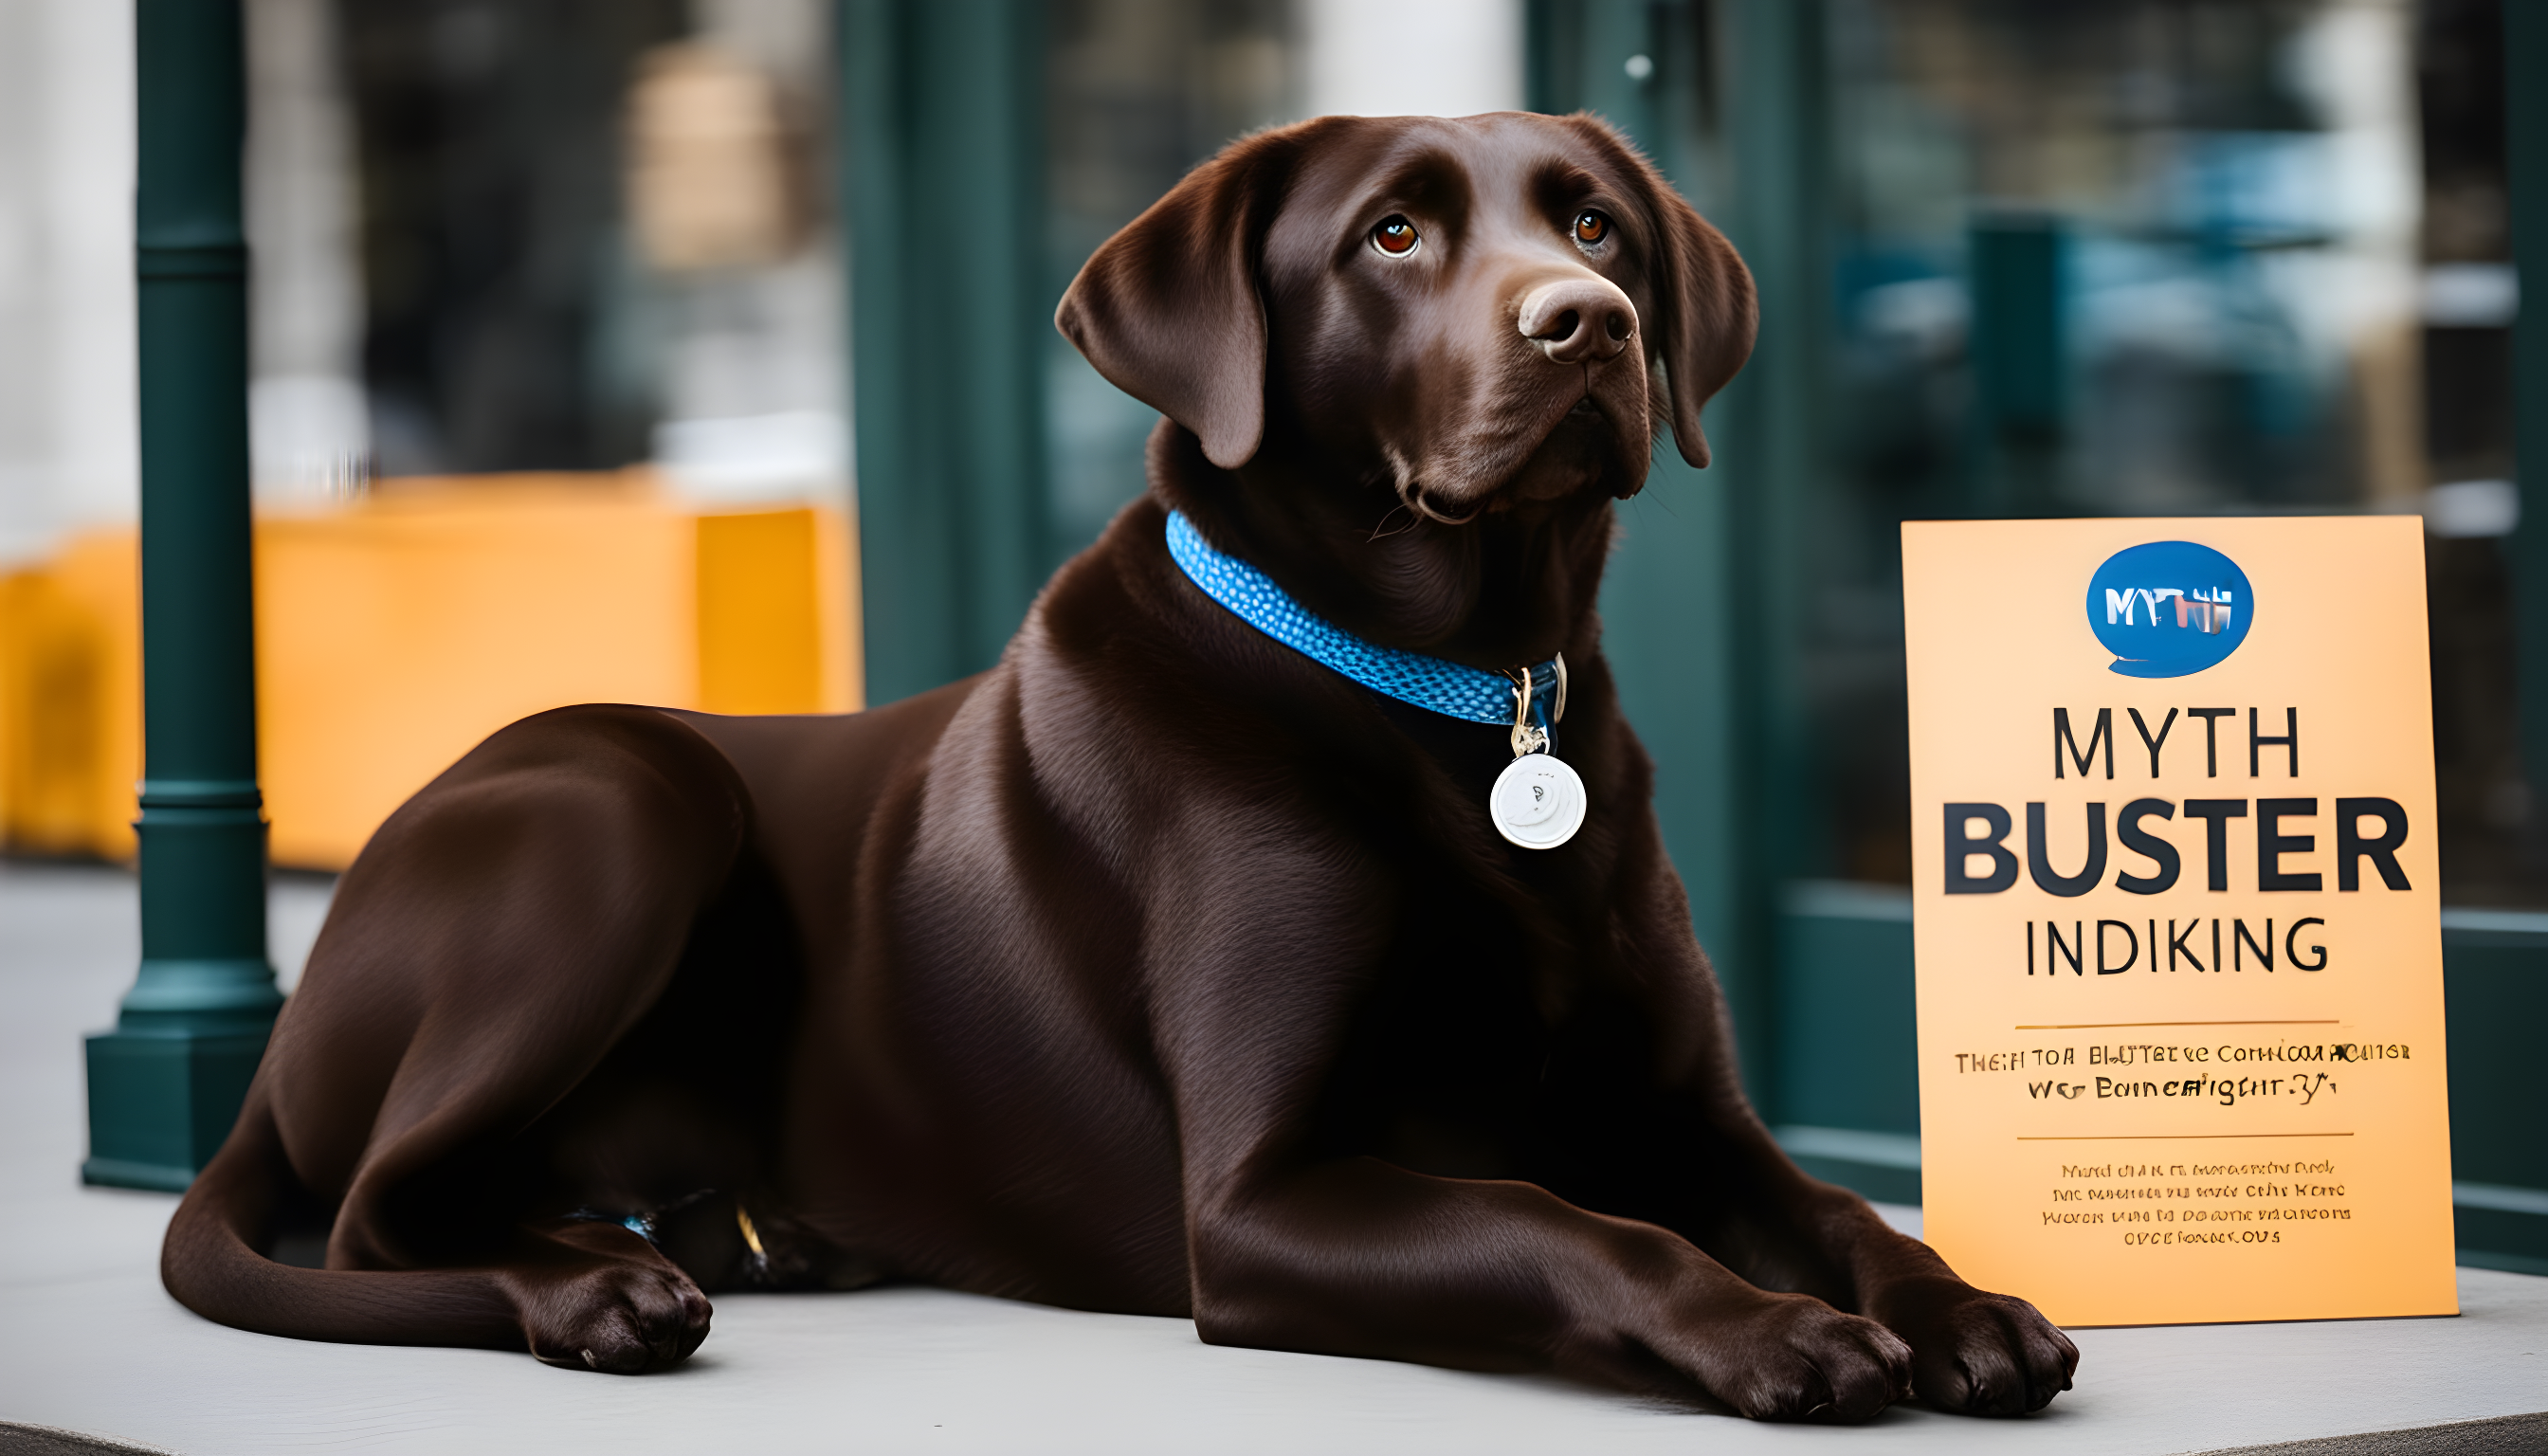 An English Chocolate Lab sitting next to a sign that says 'Myth Buster'